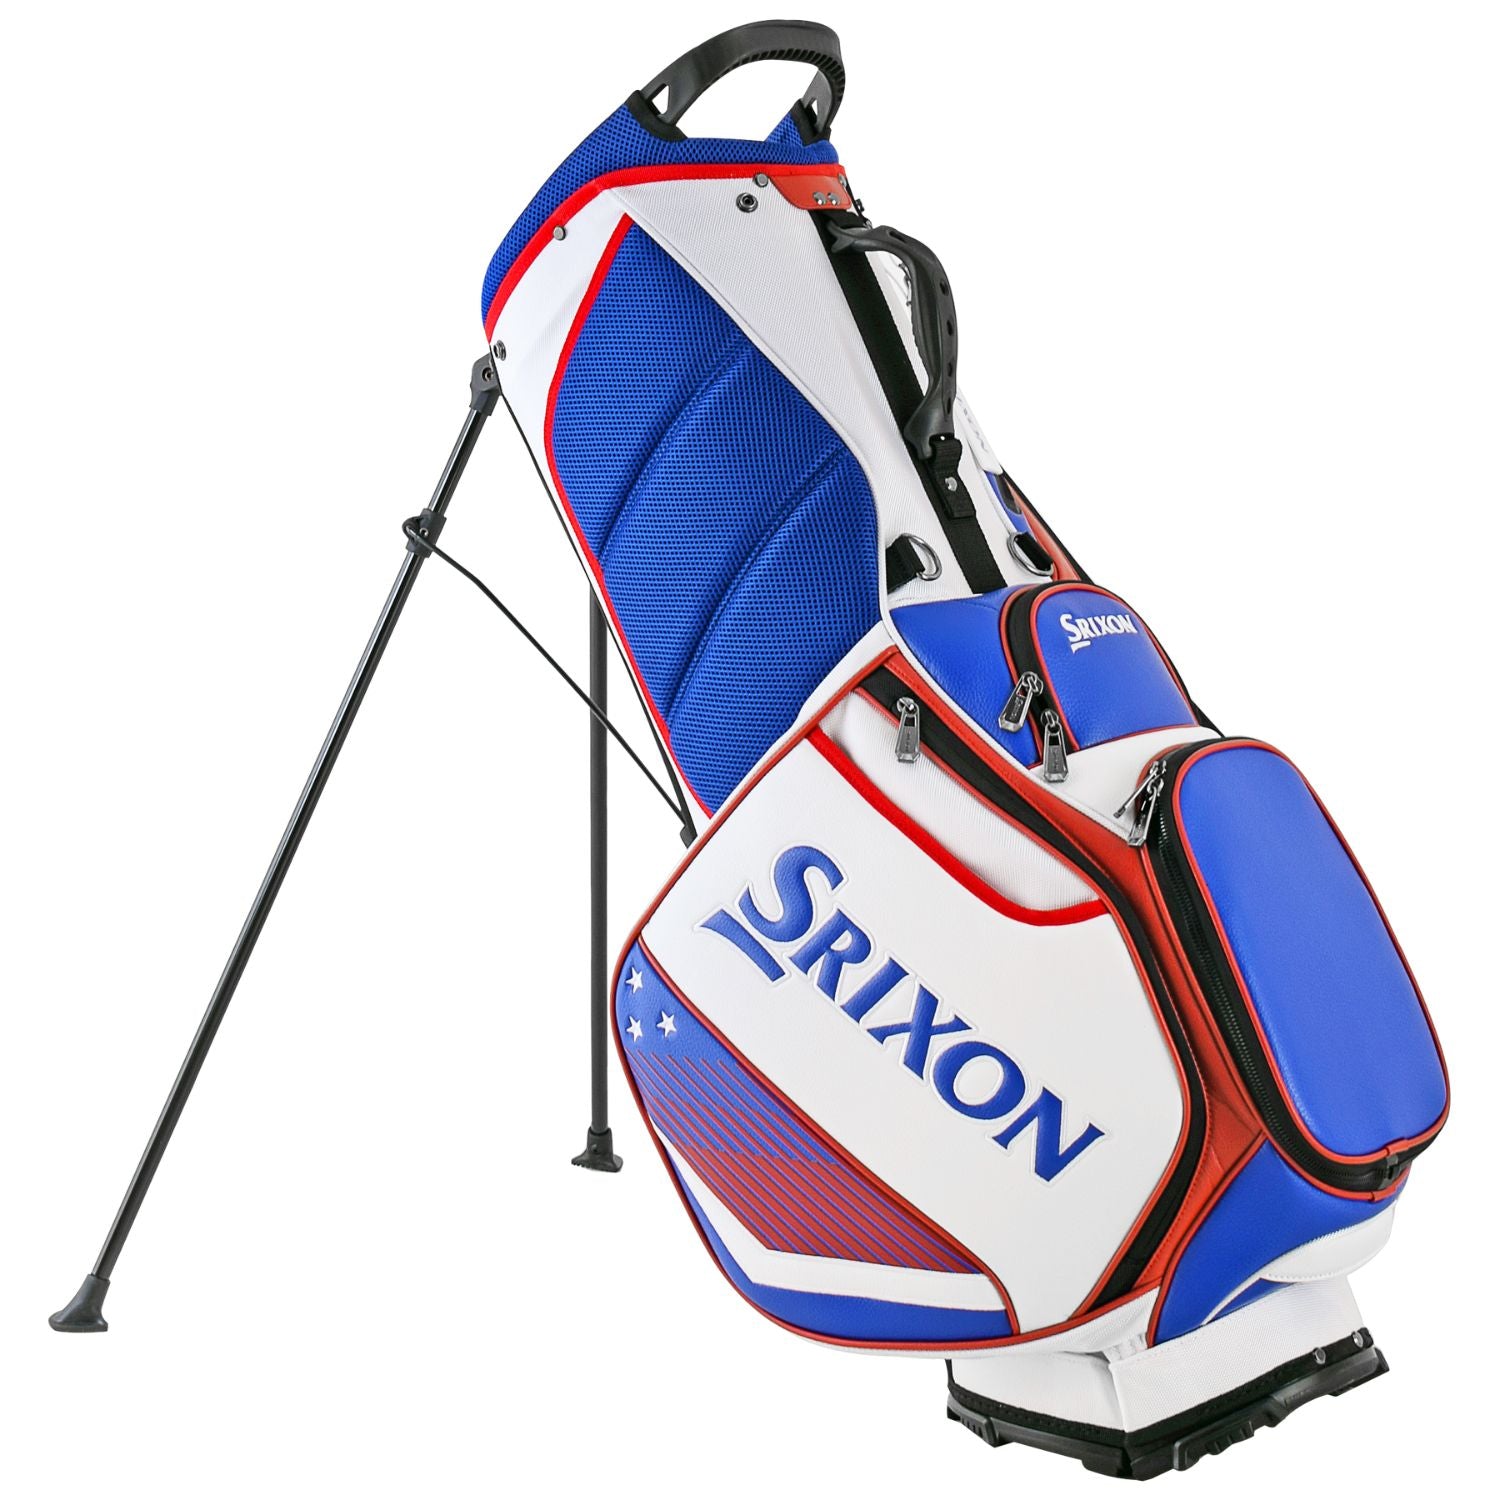 Srixon Limited Edition US Open Tour Stand Golf Bag